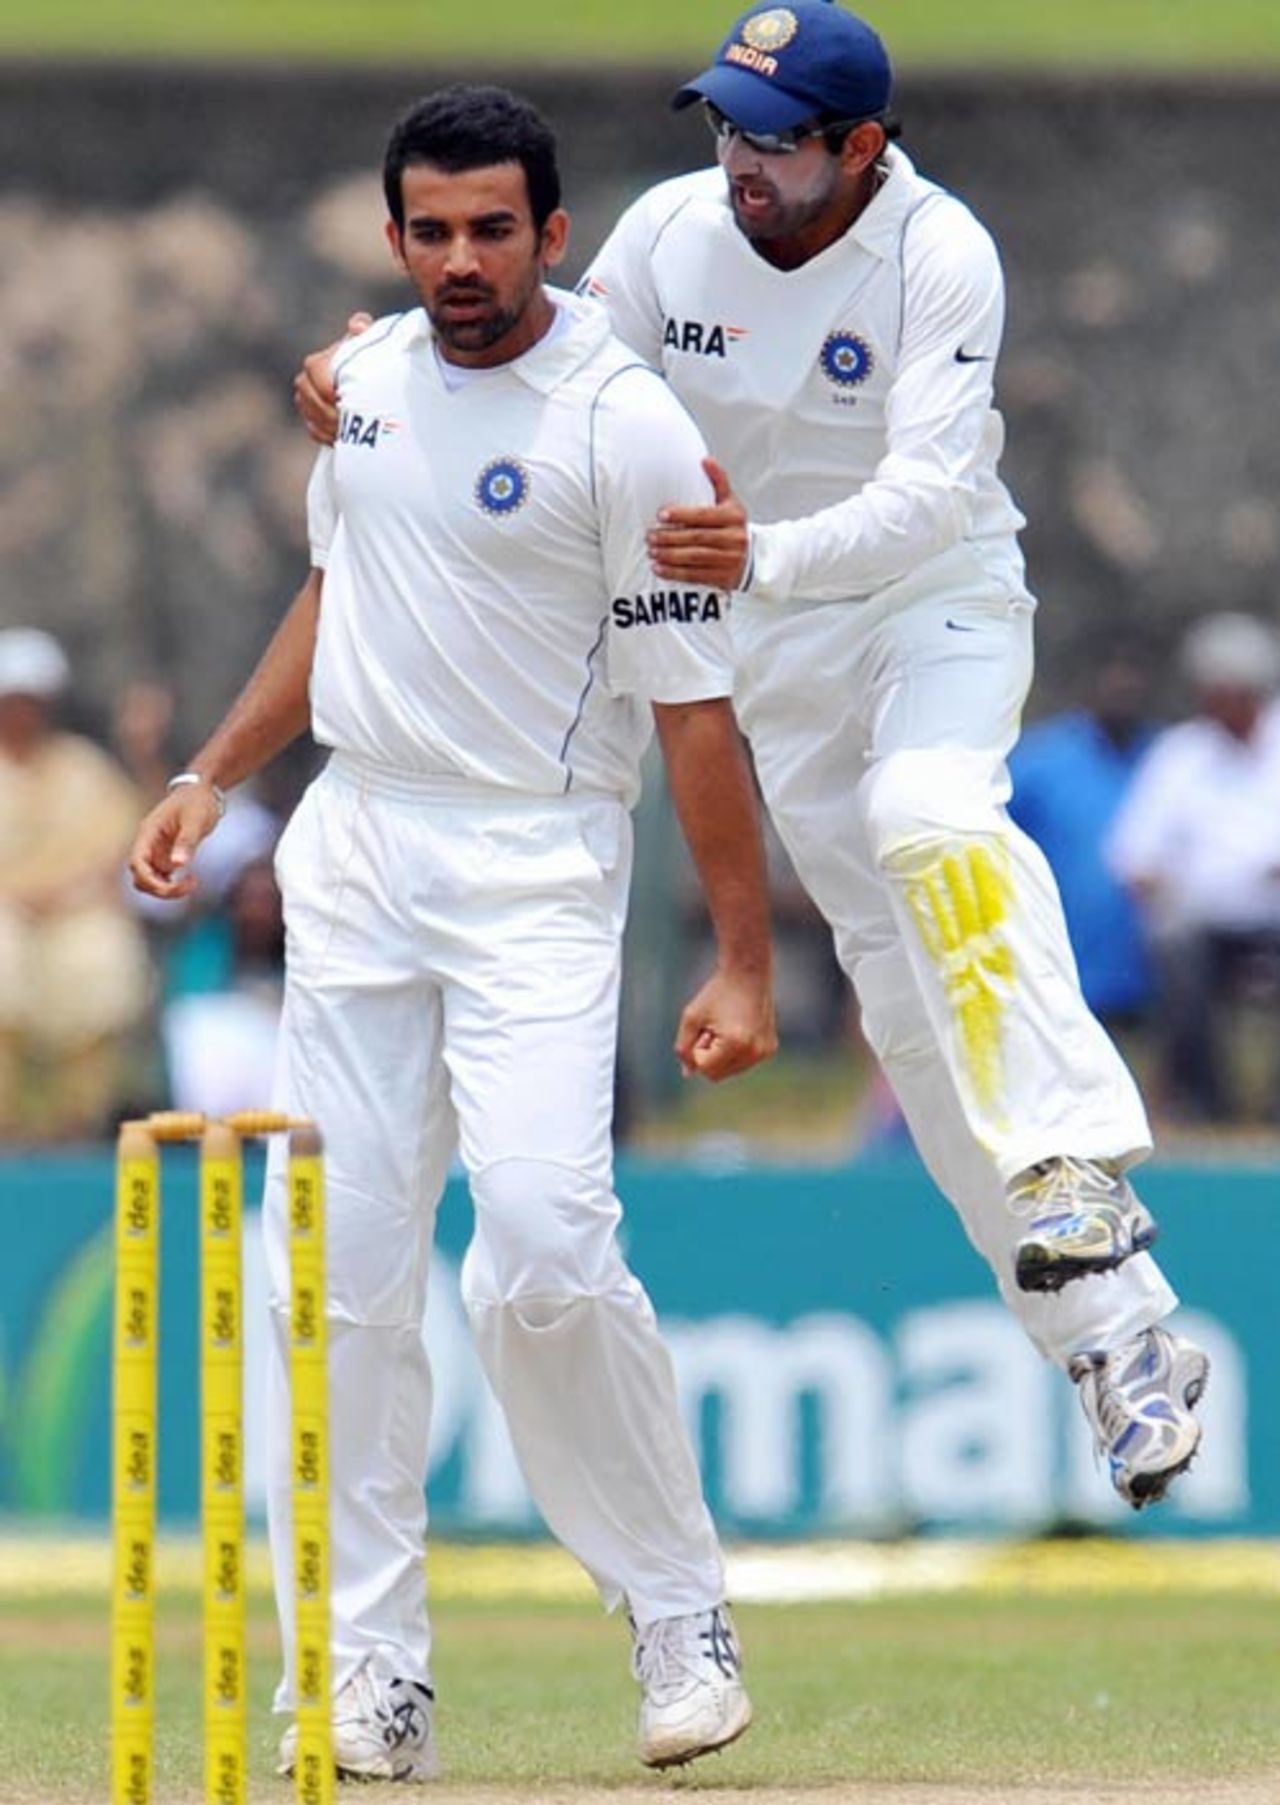 Gautam Gambhir is ecstatic after Zaheer Khan gets a wicket, Sri Lanka v India, 2nd Test, Galle, 4th day, August 3, 2008
